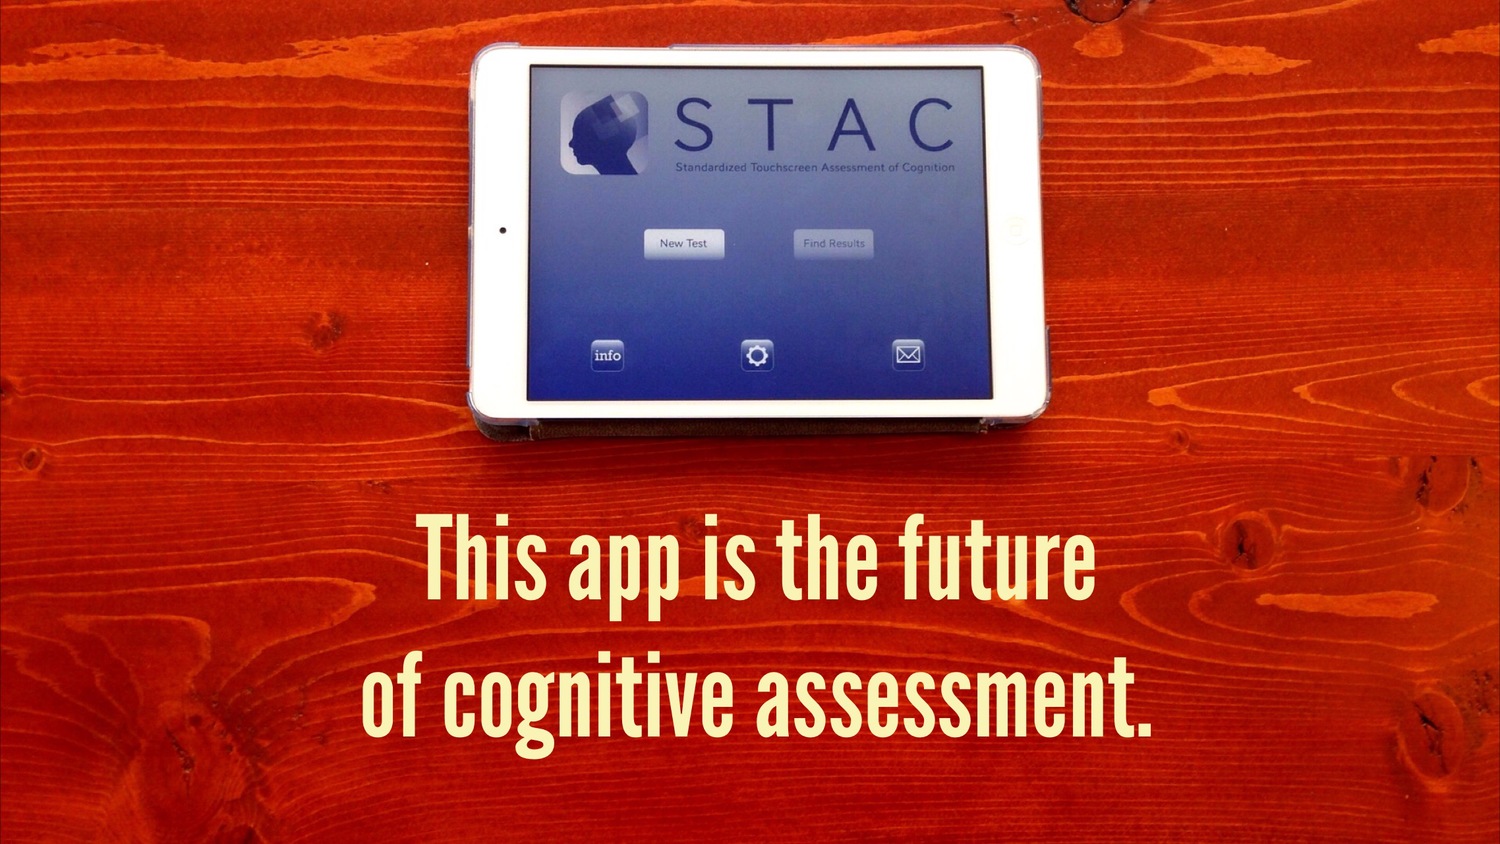 STAC: Cognitive Assessment App for the iPad